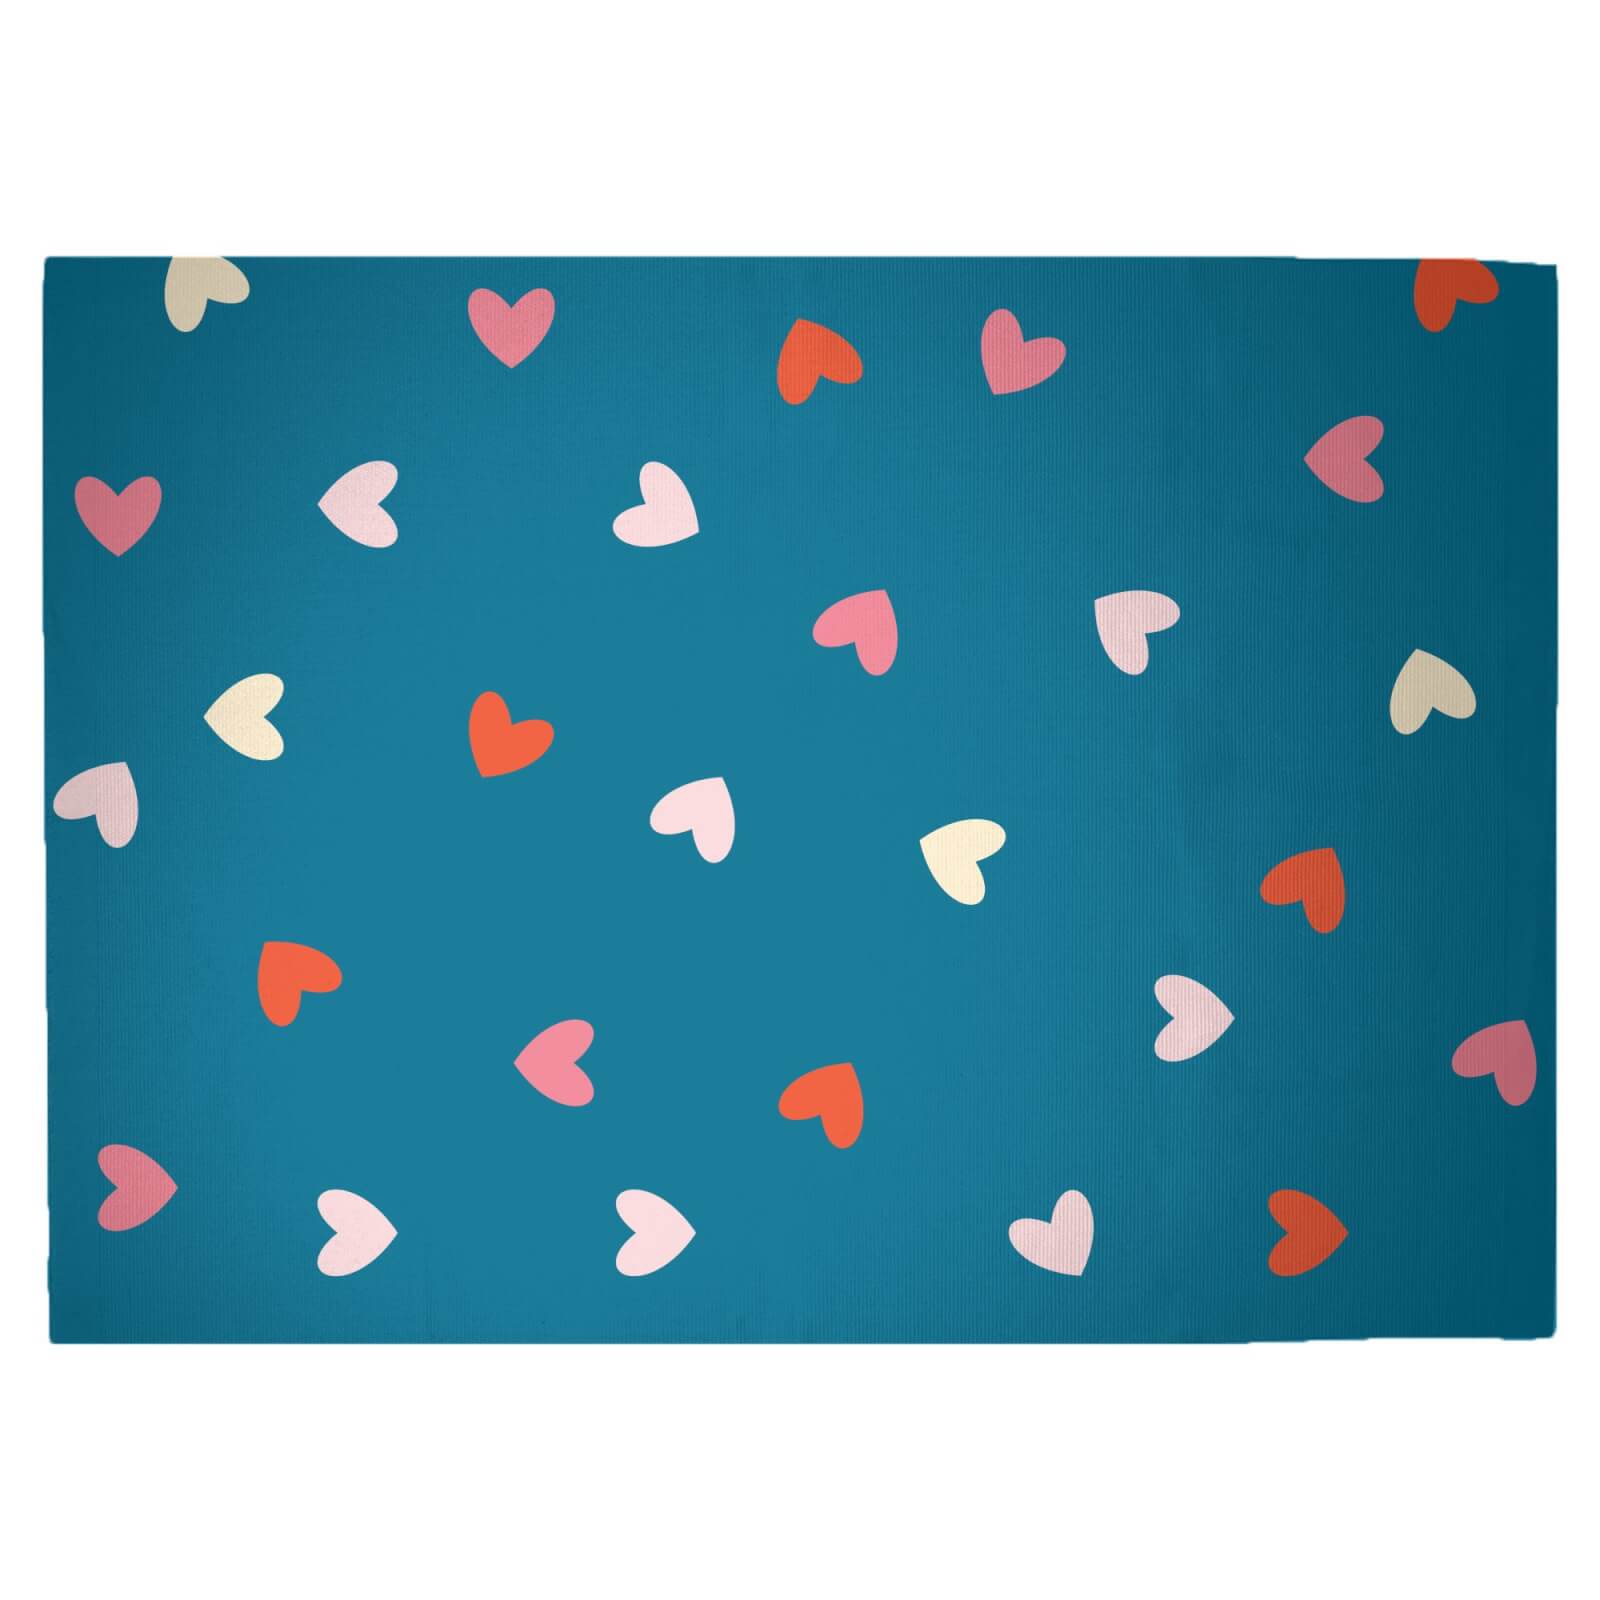 Love Hearts Woven Rug - Large